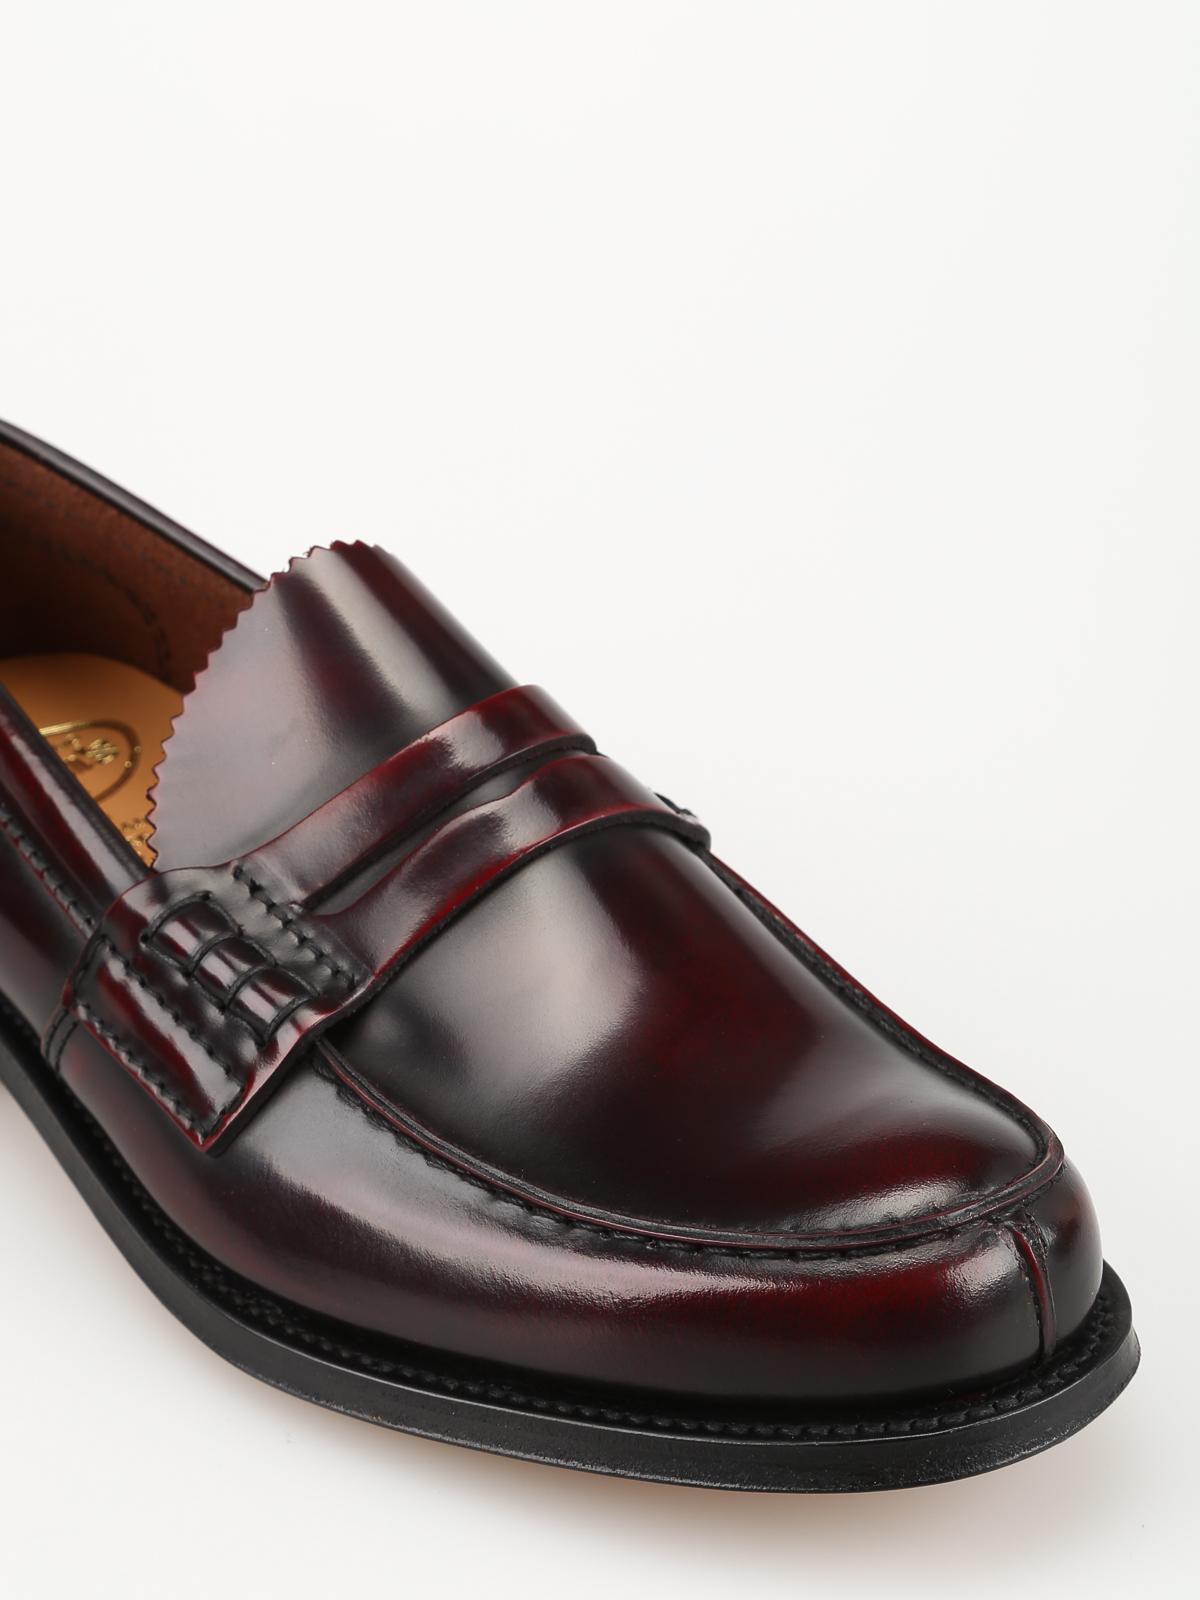 Church's Tunbridge Burgundy Leather Loafers in Brown for Men - Lyst